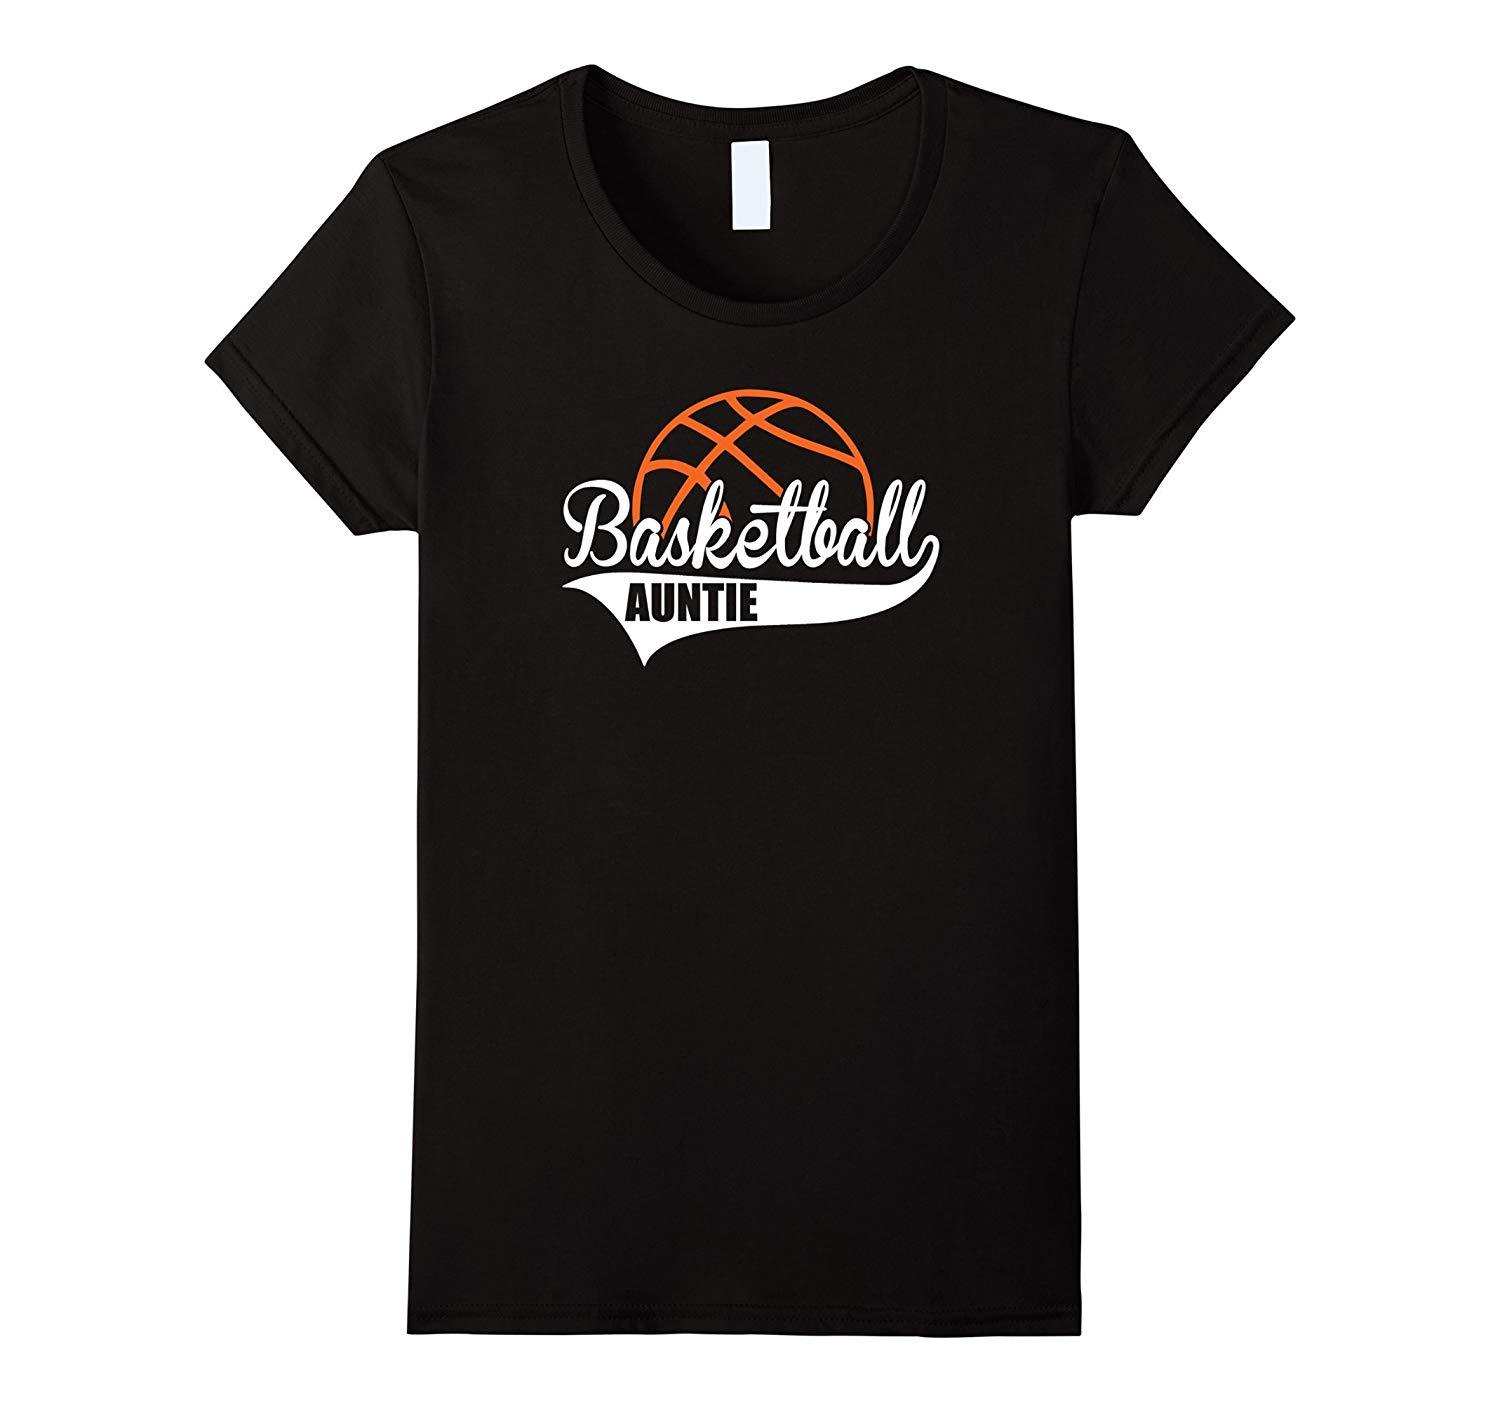 New Tee - Basketball AUNTIE T-Tee Matching Family Basketball Wowen - Tops